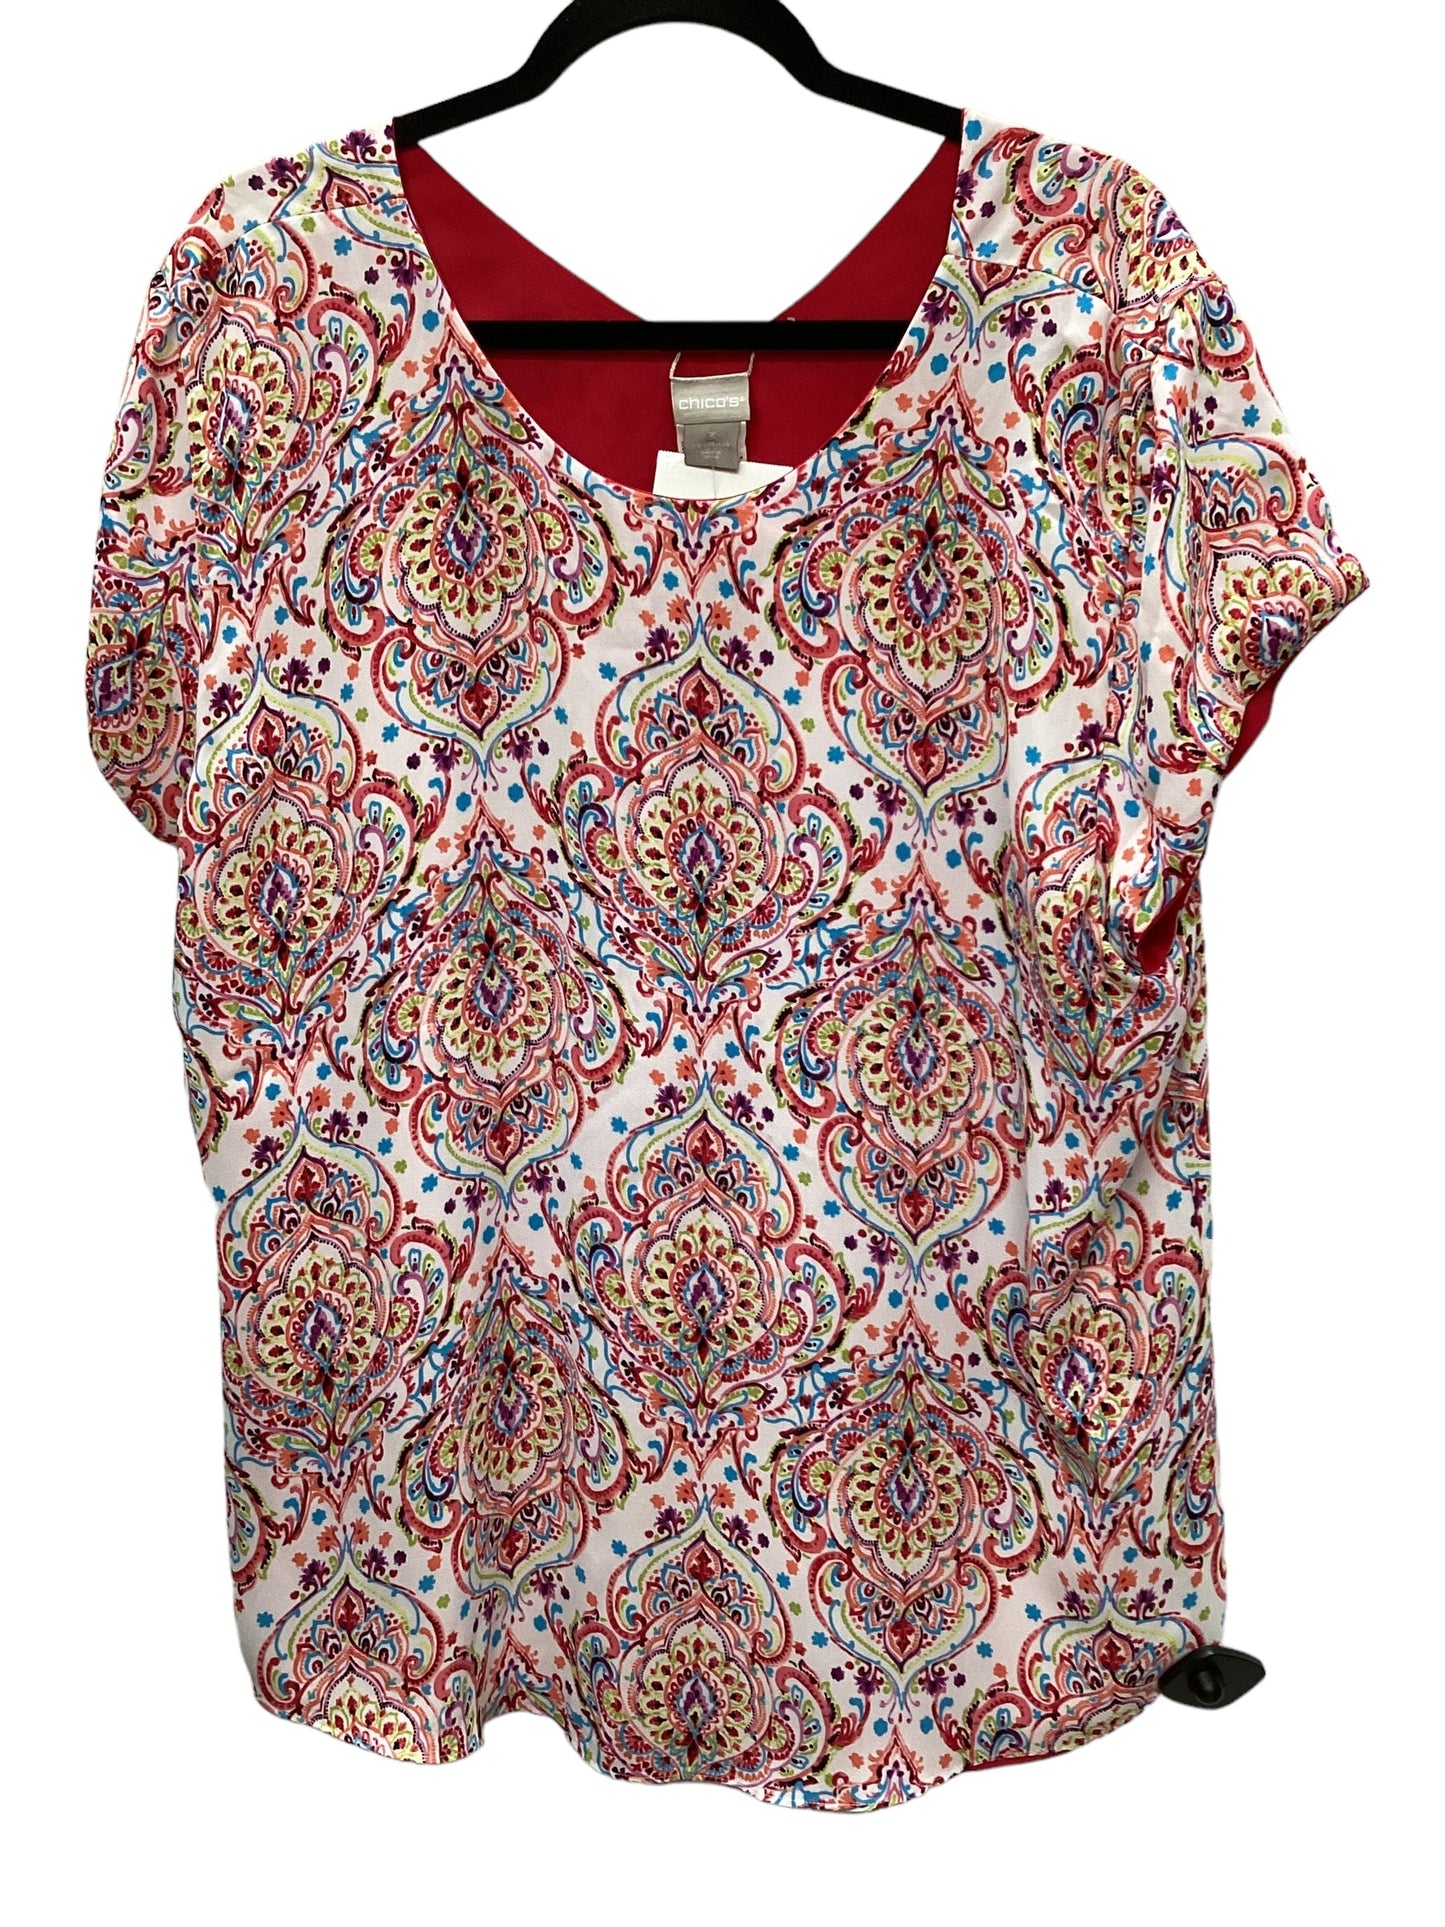 Multi-colored Top Short Sleeve Chicos, Size 3